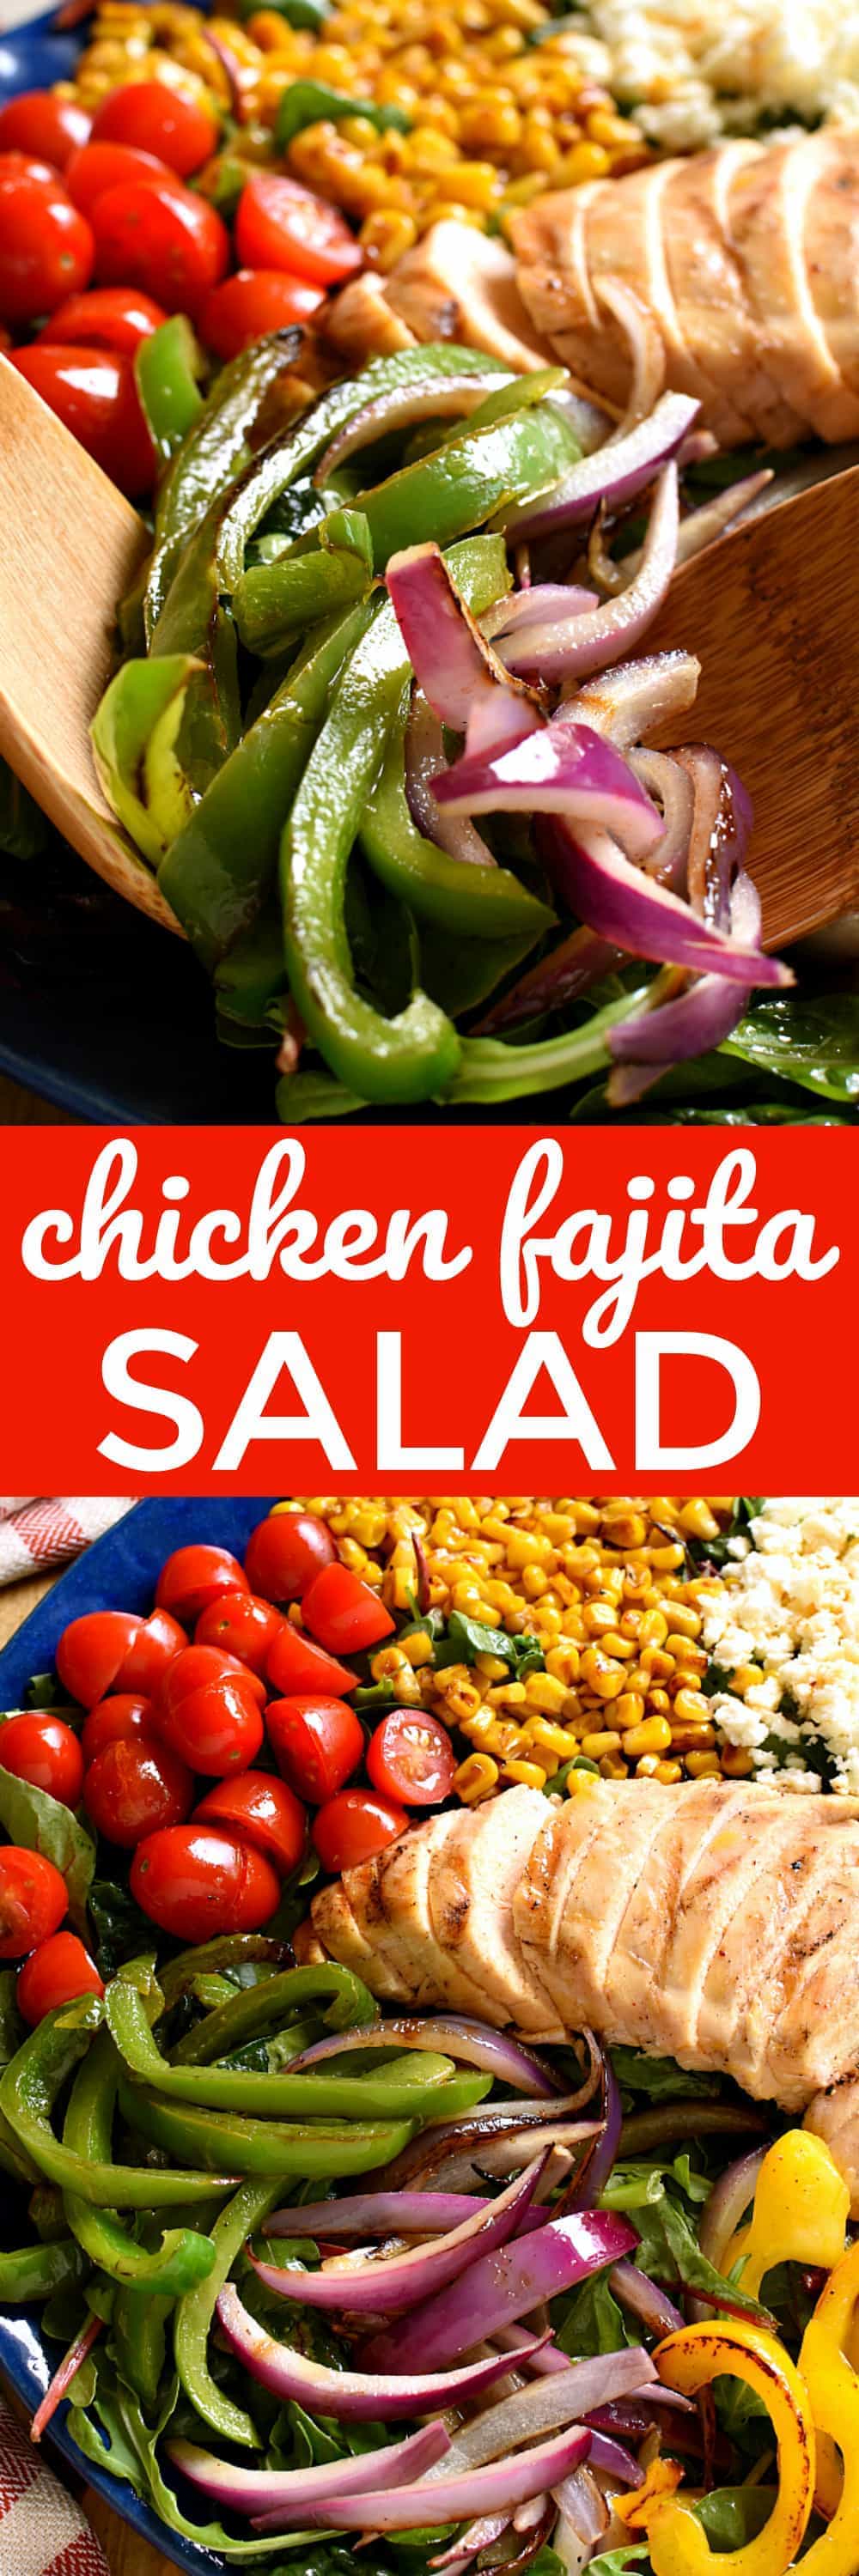 If you love Chicken Fajitas, you'll LOVE this Chicken Fajita Salad! Loaded with grilled peppers, onions, chicken, corn, tomatoes, avocado, and queso fresco....this salad has ALL the best flavors, and a delicious chili lime vinaigrette to top it all off!